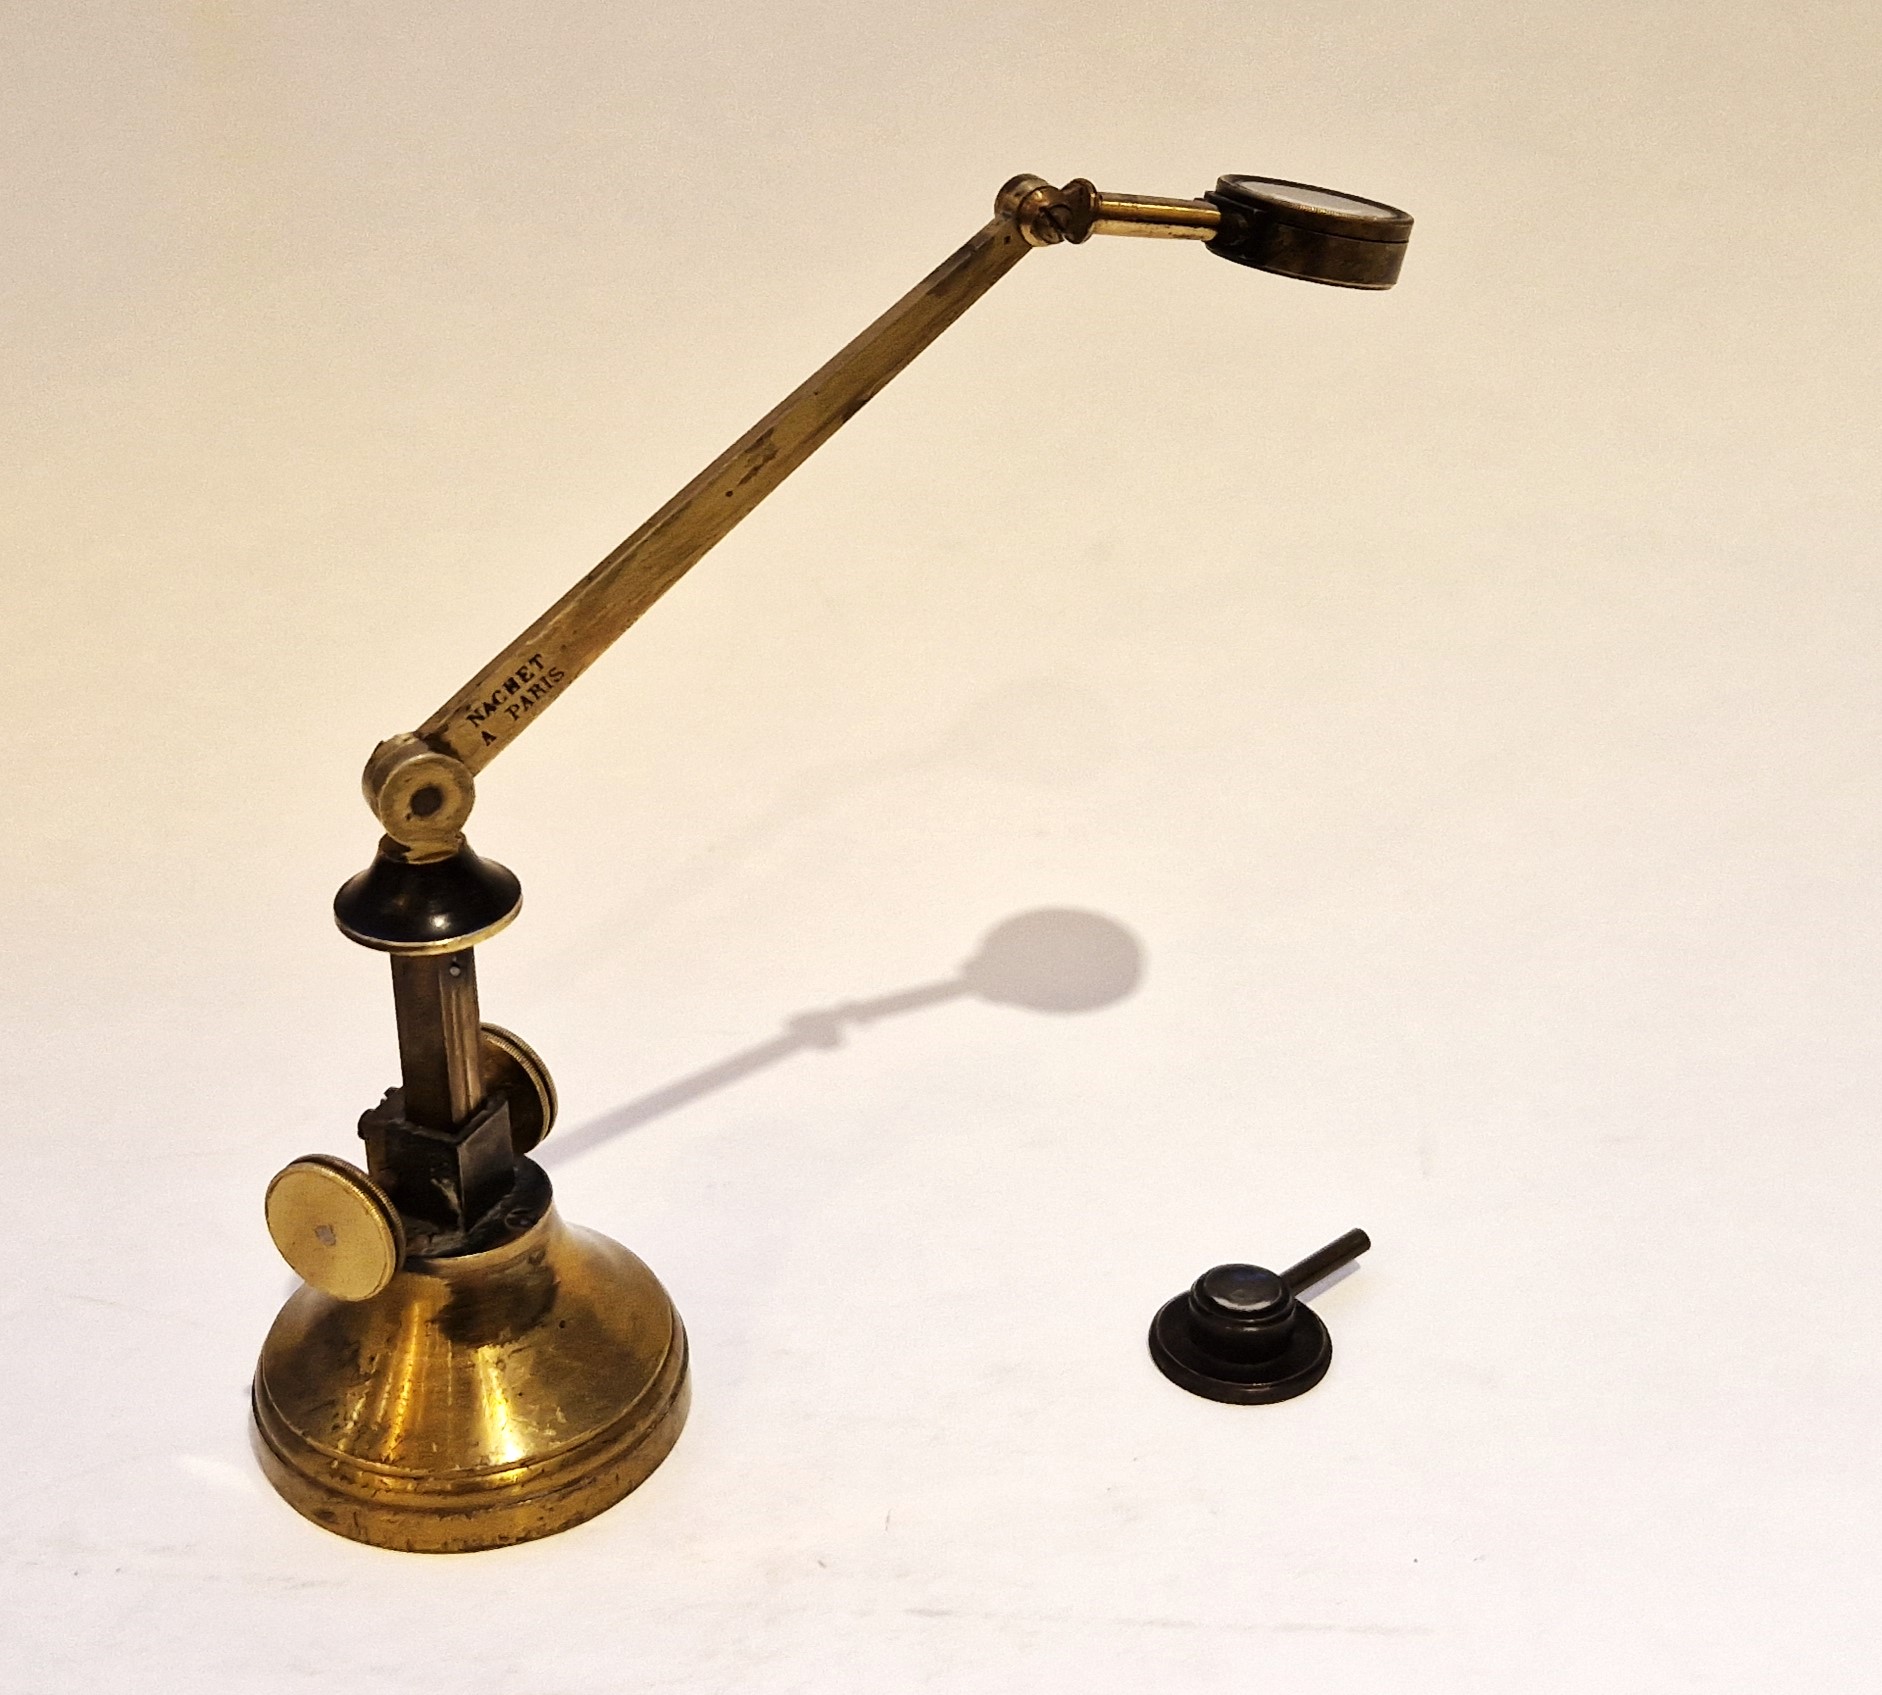 Rare simple microscope with articulated arm by Nachet with two eyepieces, circa 1900